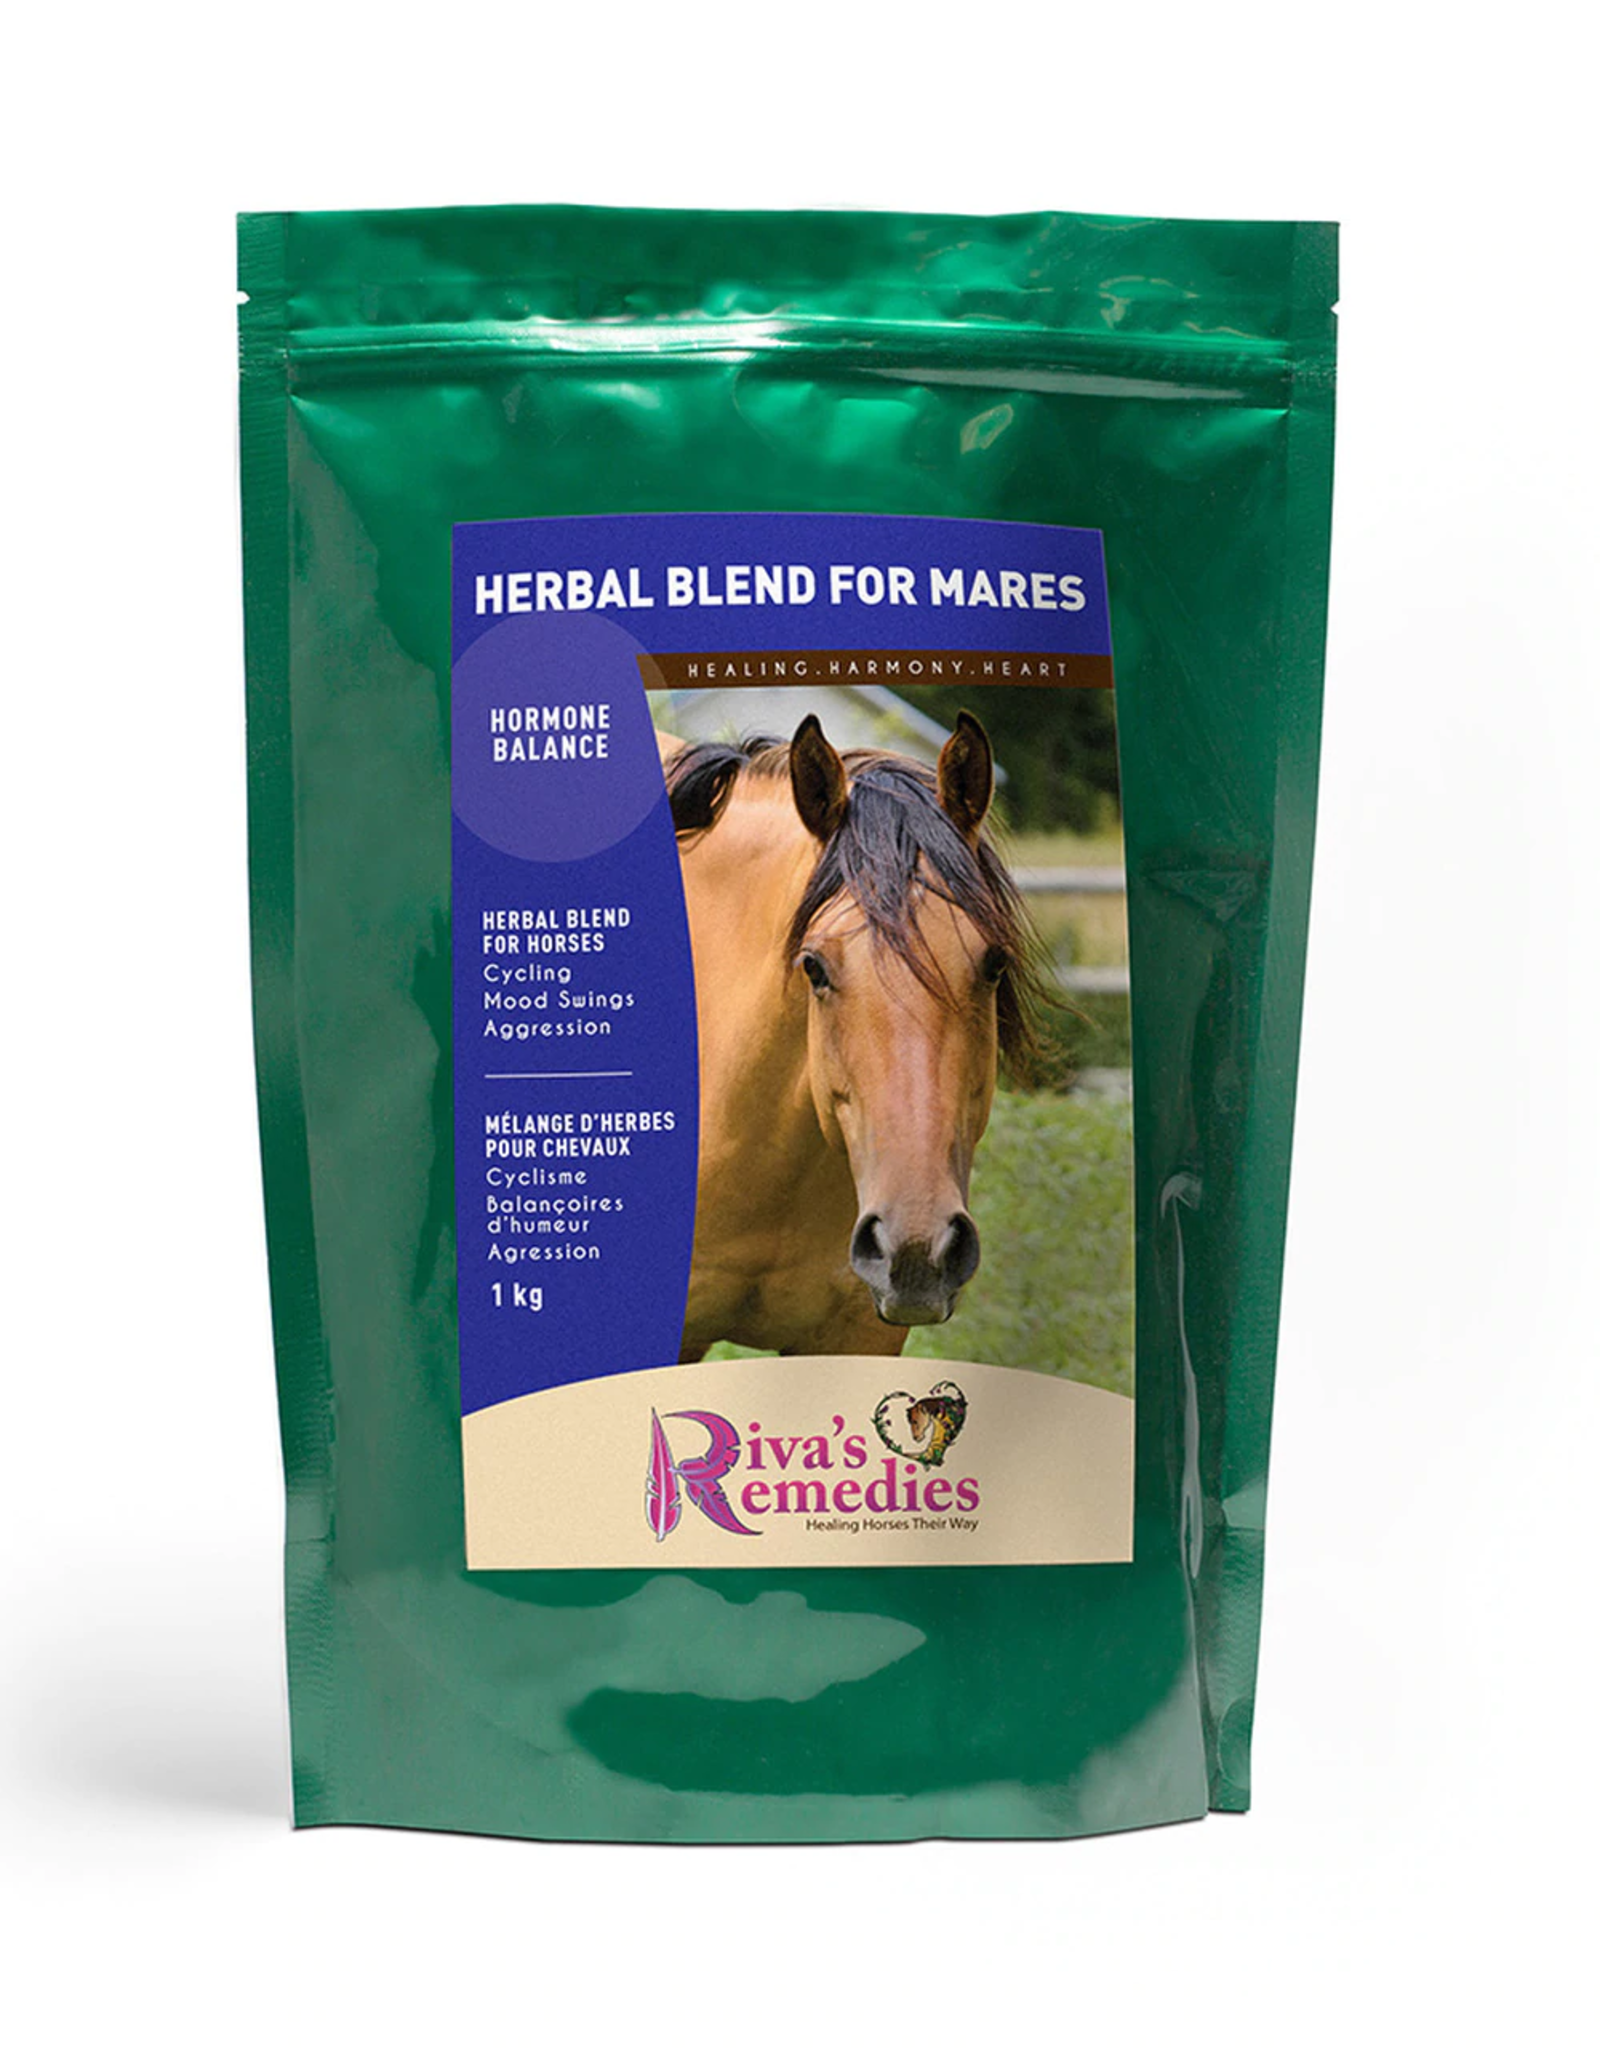 RIVA'S REMEDIES HERBAL BLEND FOR MARES 1KG